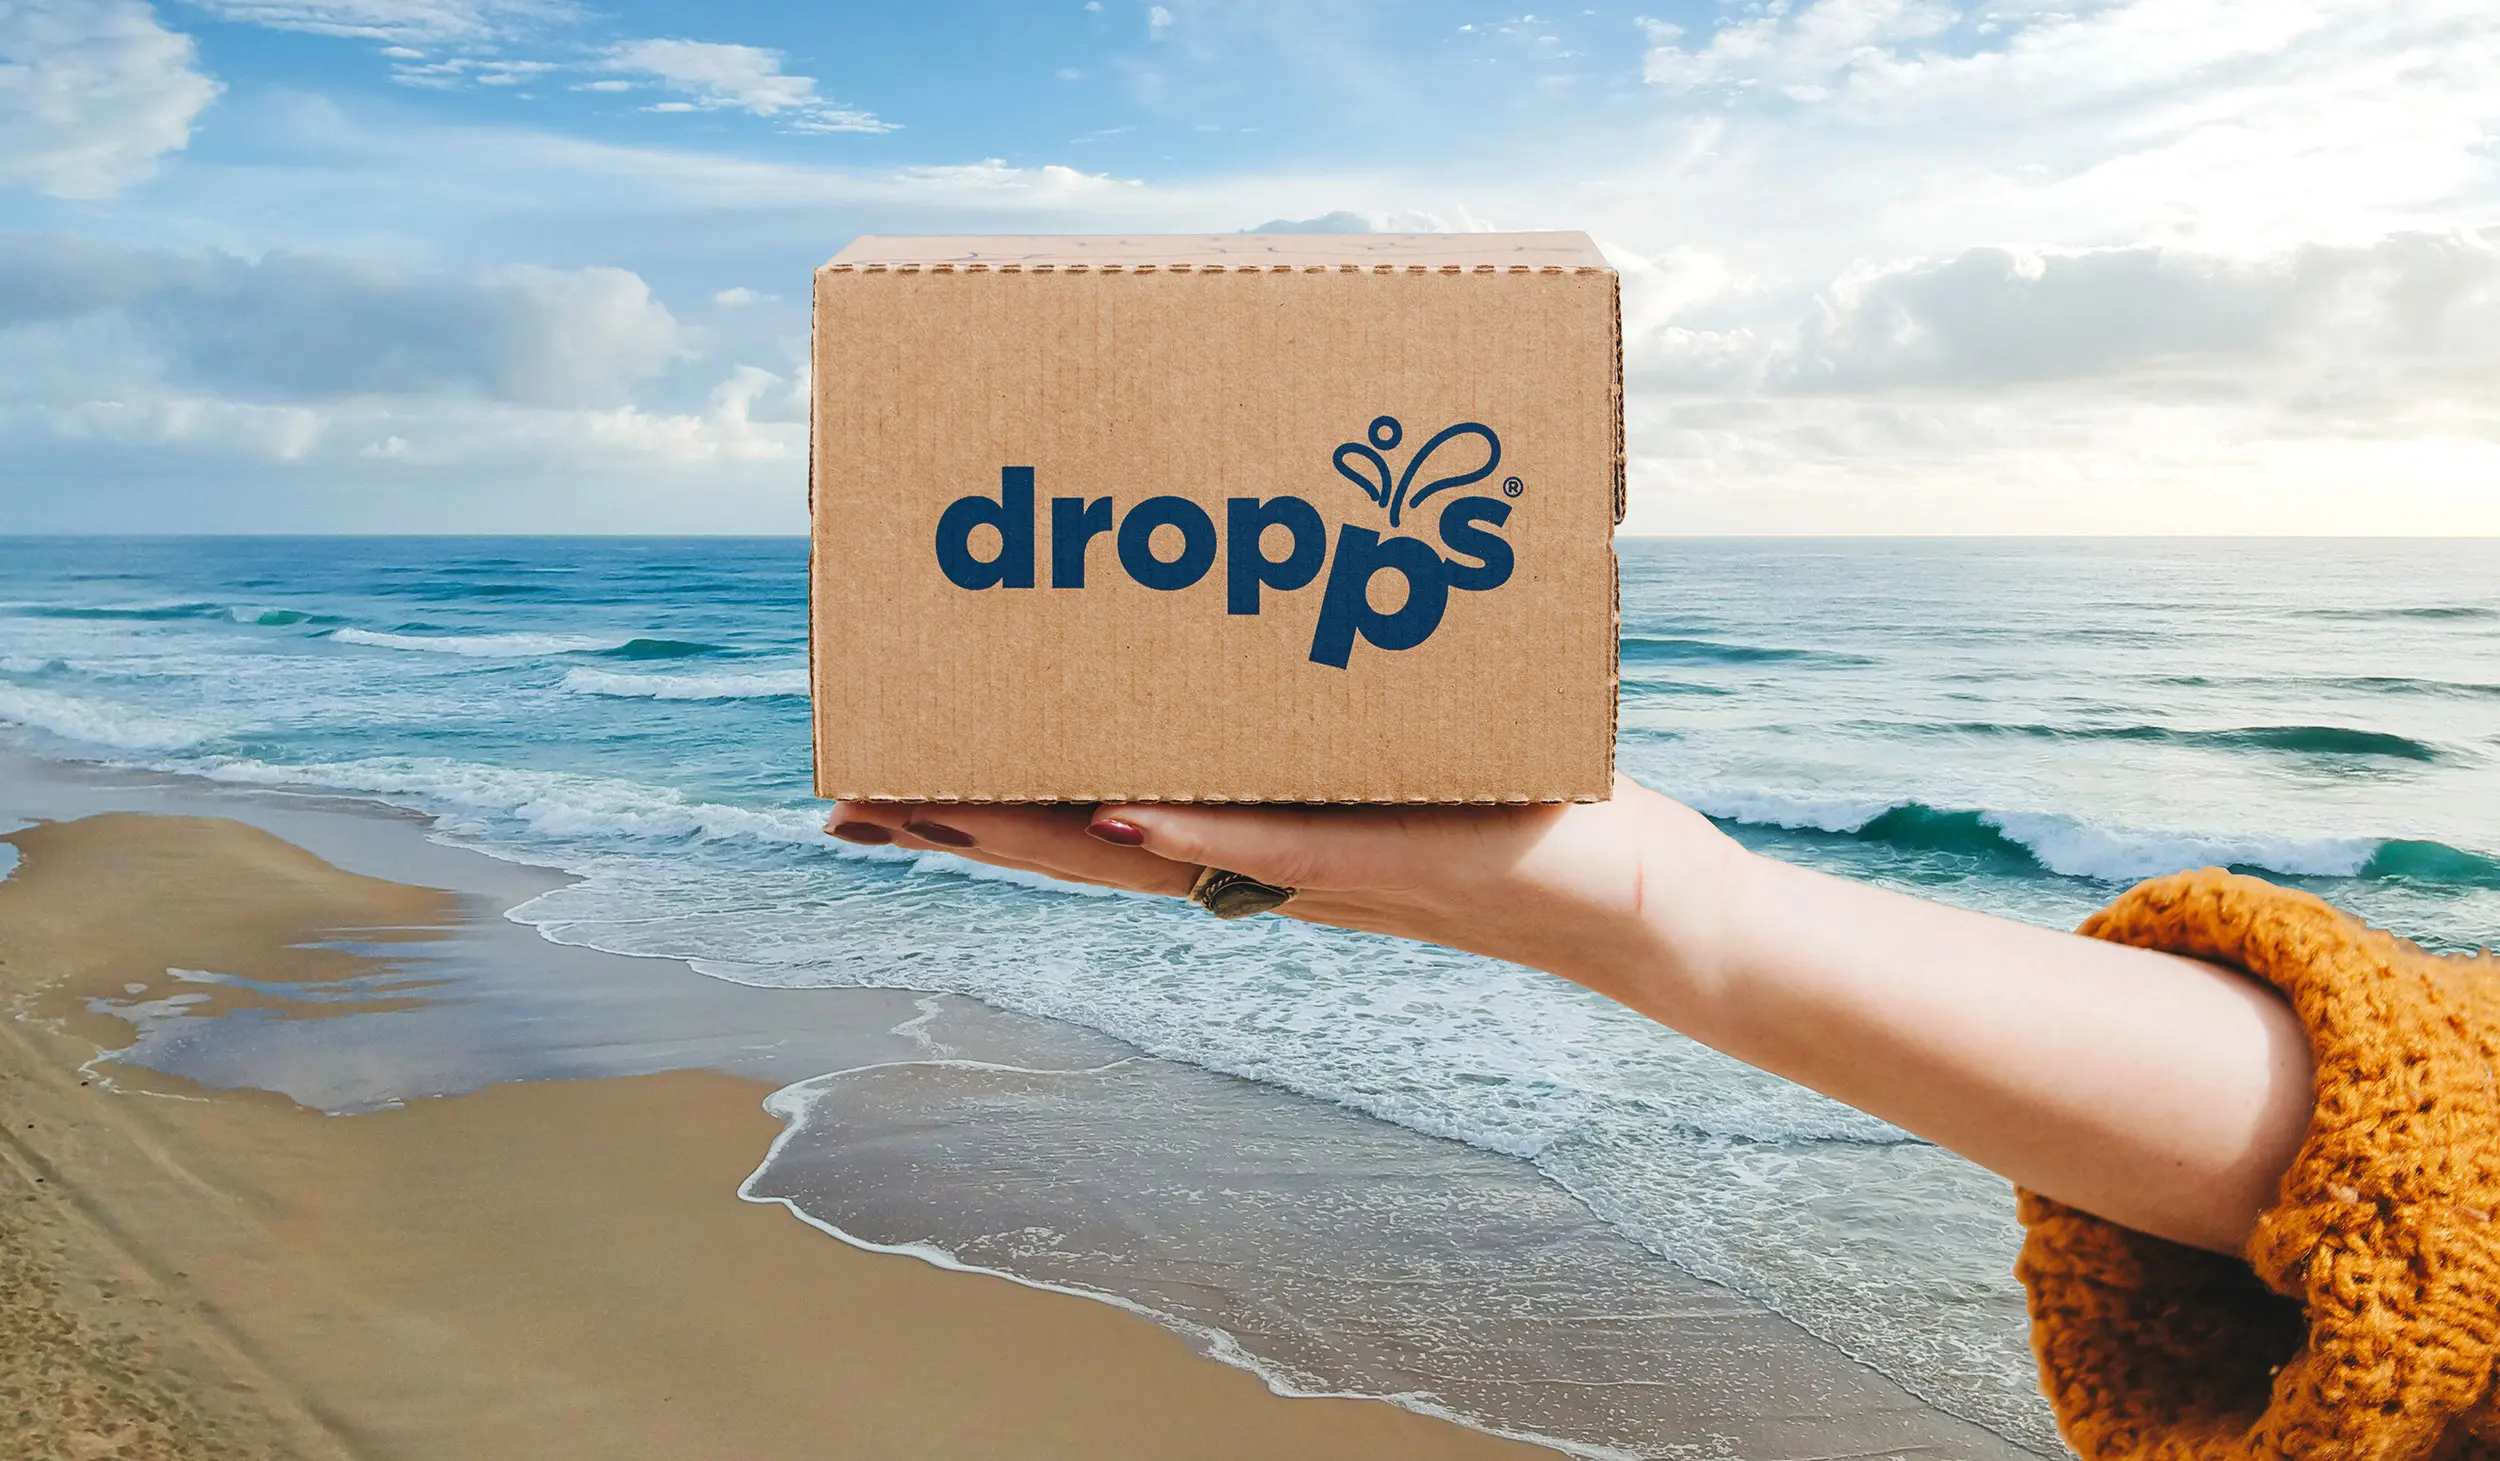 Household cleaning products brand Dropps is known for pairing recyclable cartons with dissolvable pods to deliver a more sustainably packaged experience direct to customers’ homes.